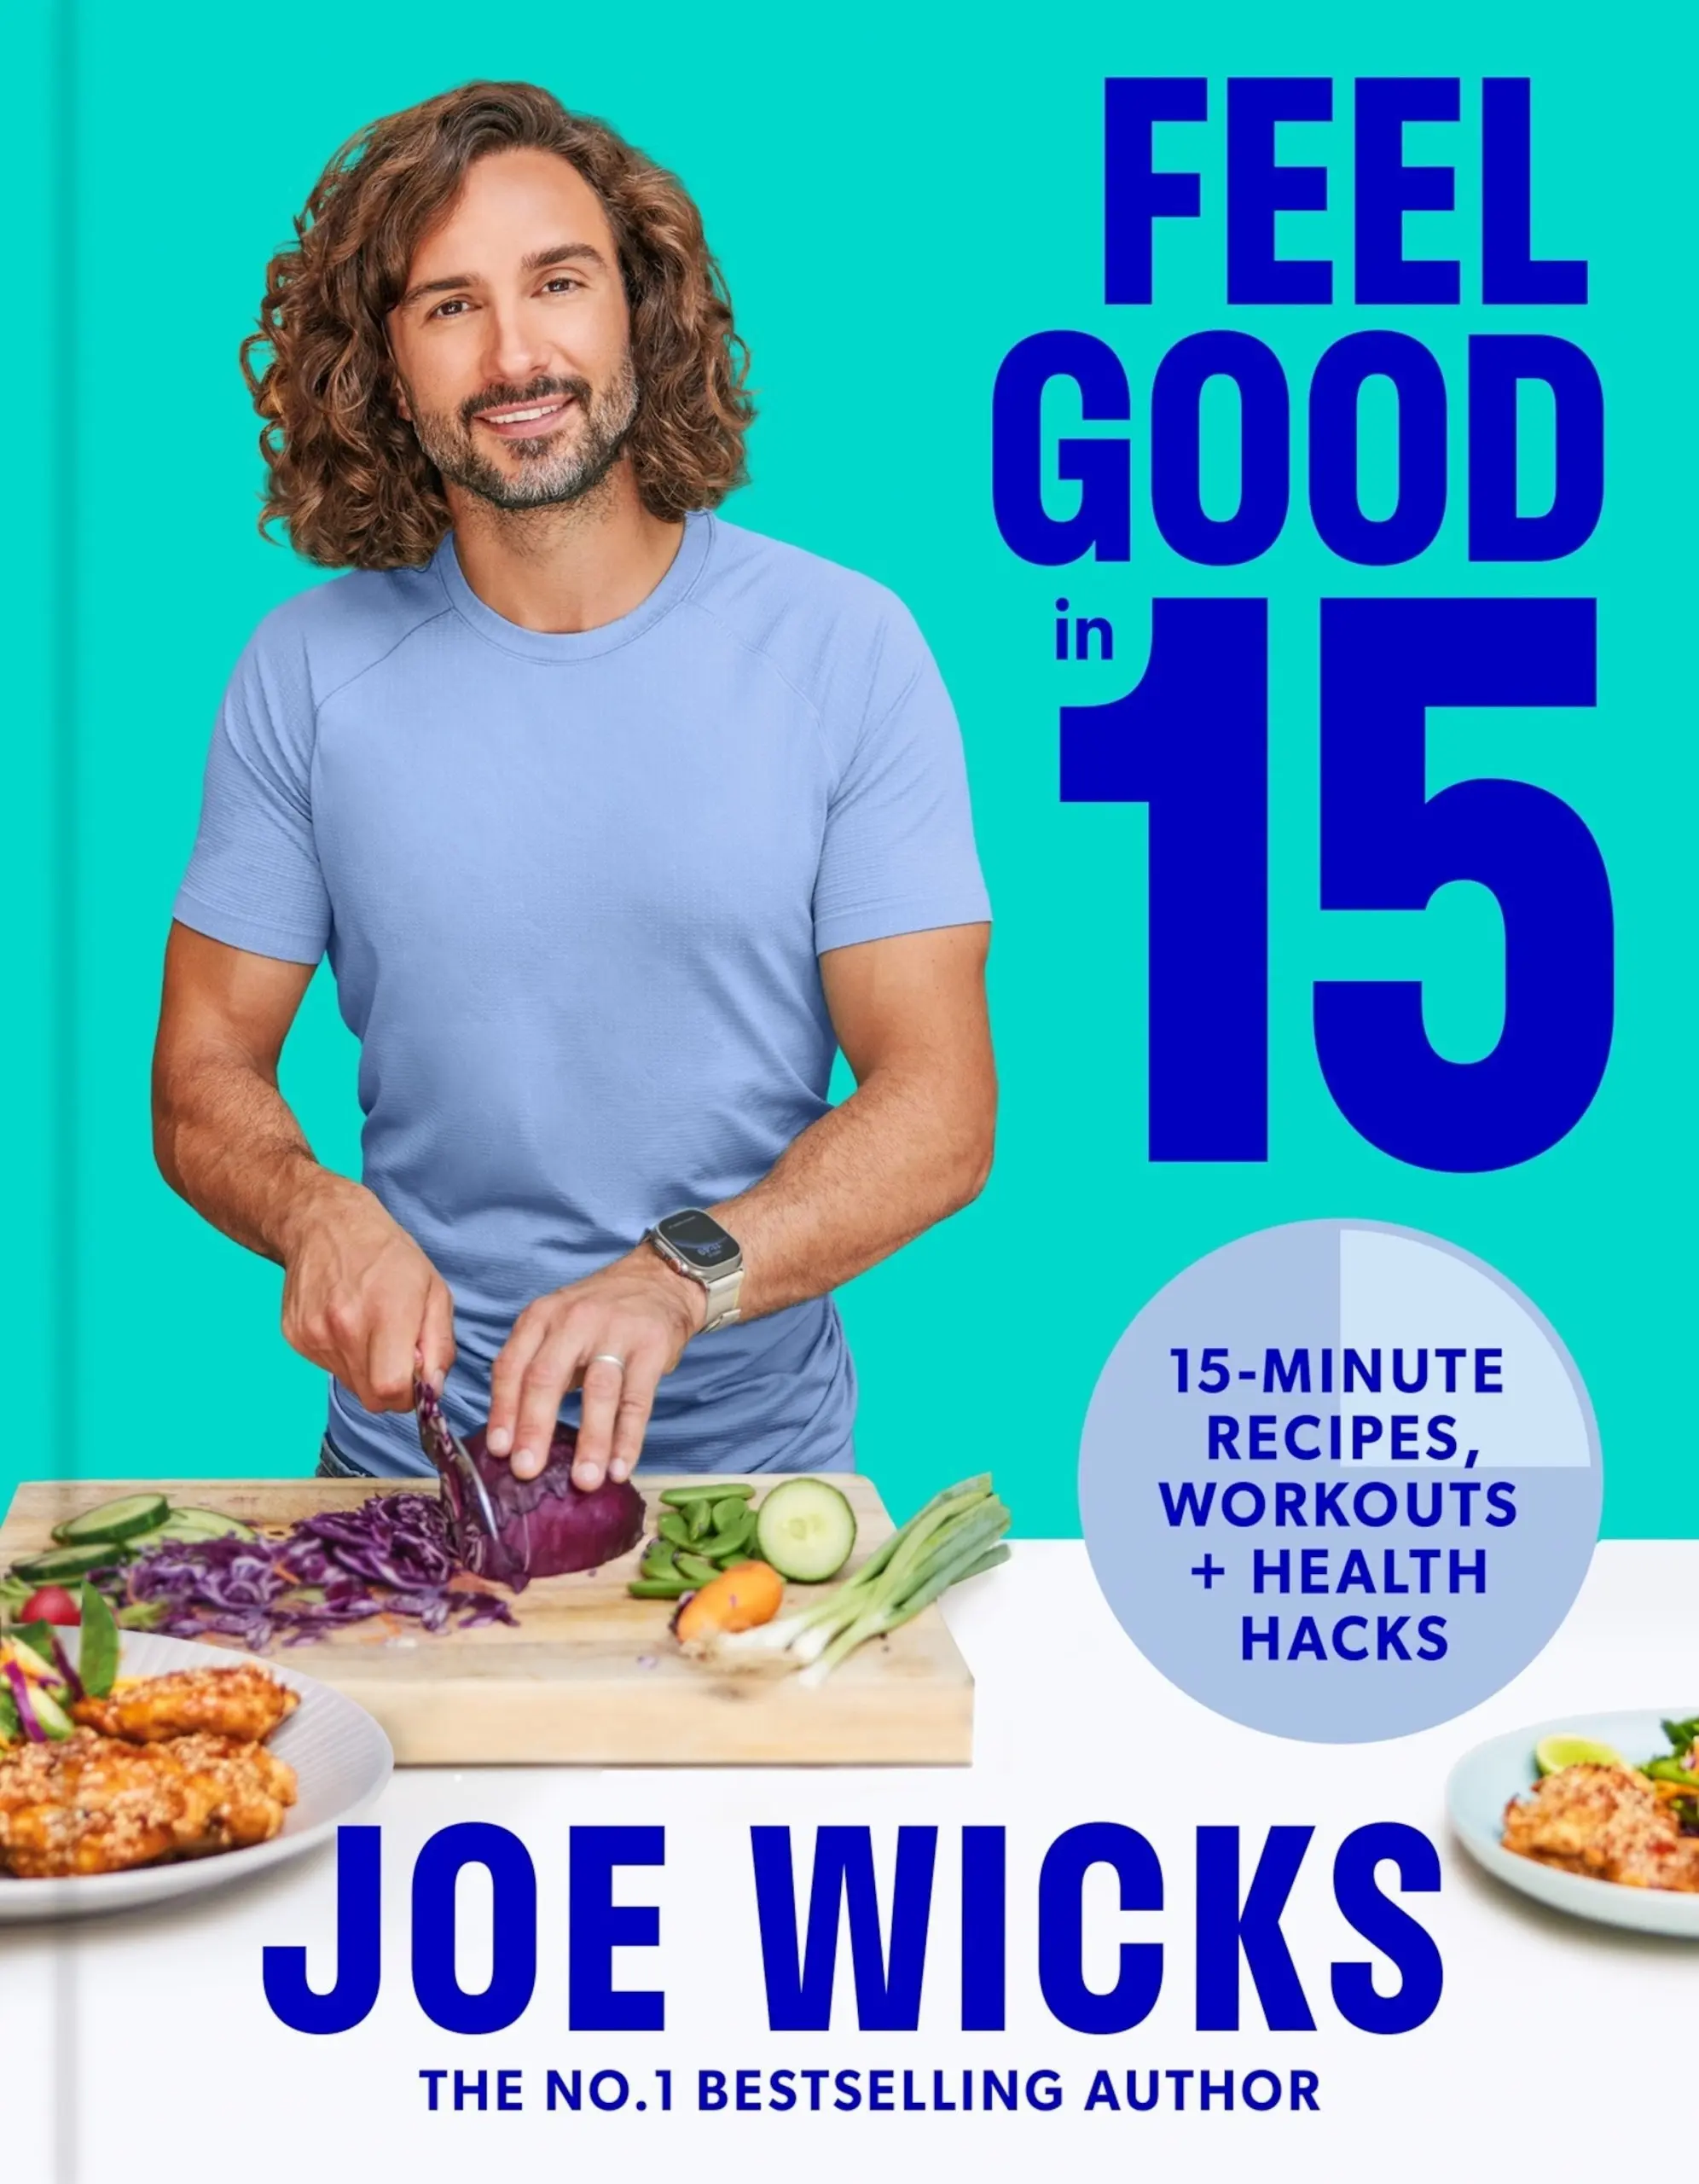 PHOTO: The cover of “Feel Good in 15” by Joe Wicks.